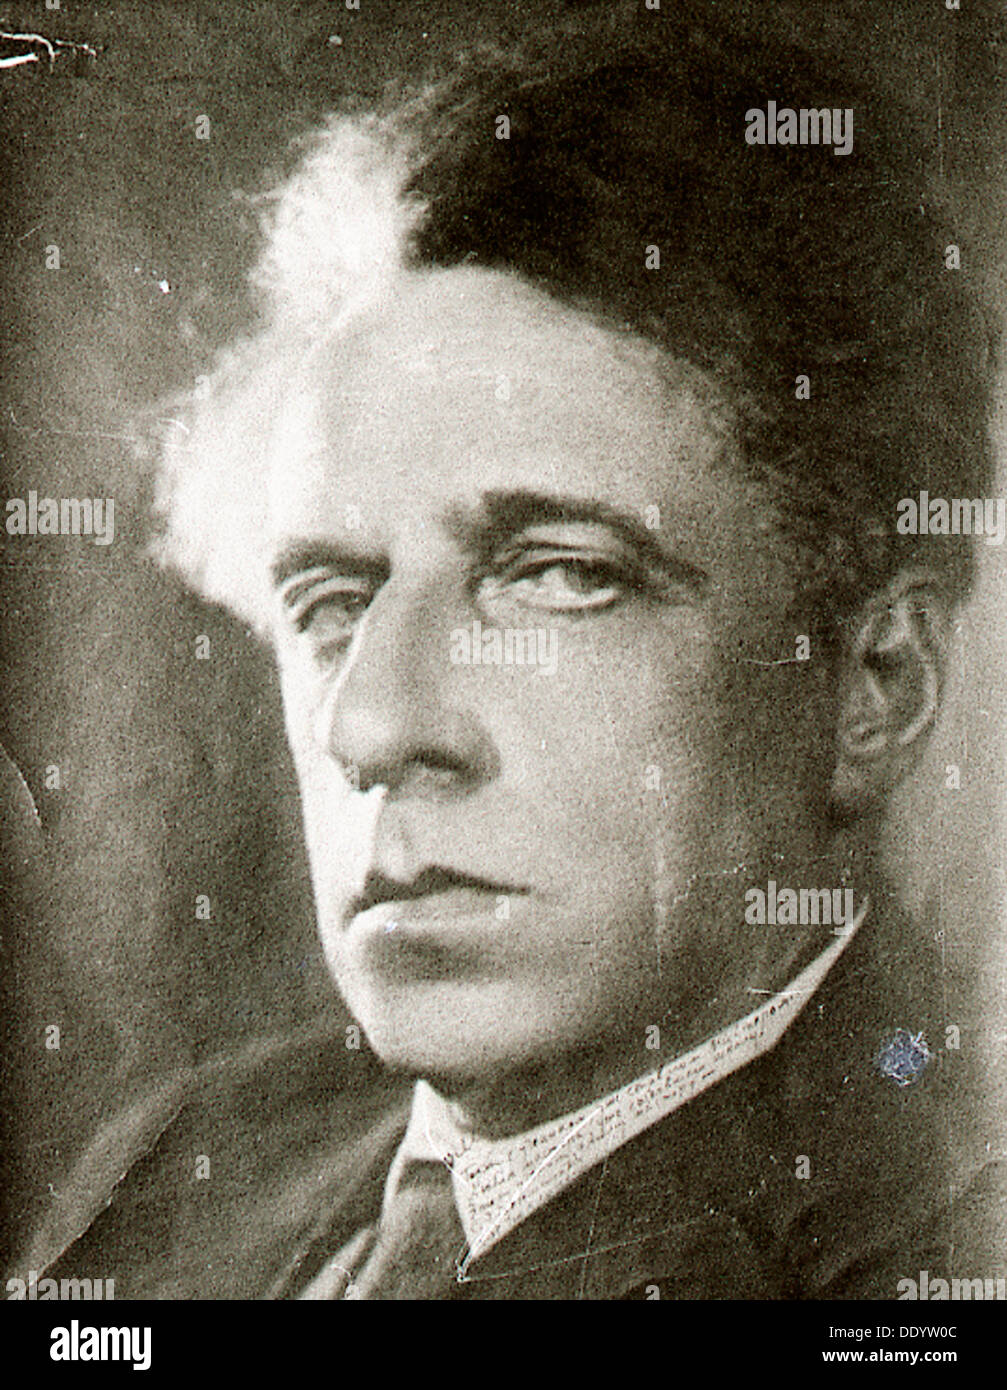 Vsevolod Meyerhold, Russian actor, theatre director and producer, 1930s. Artist: Anon Stock Photo